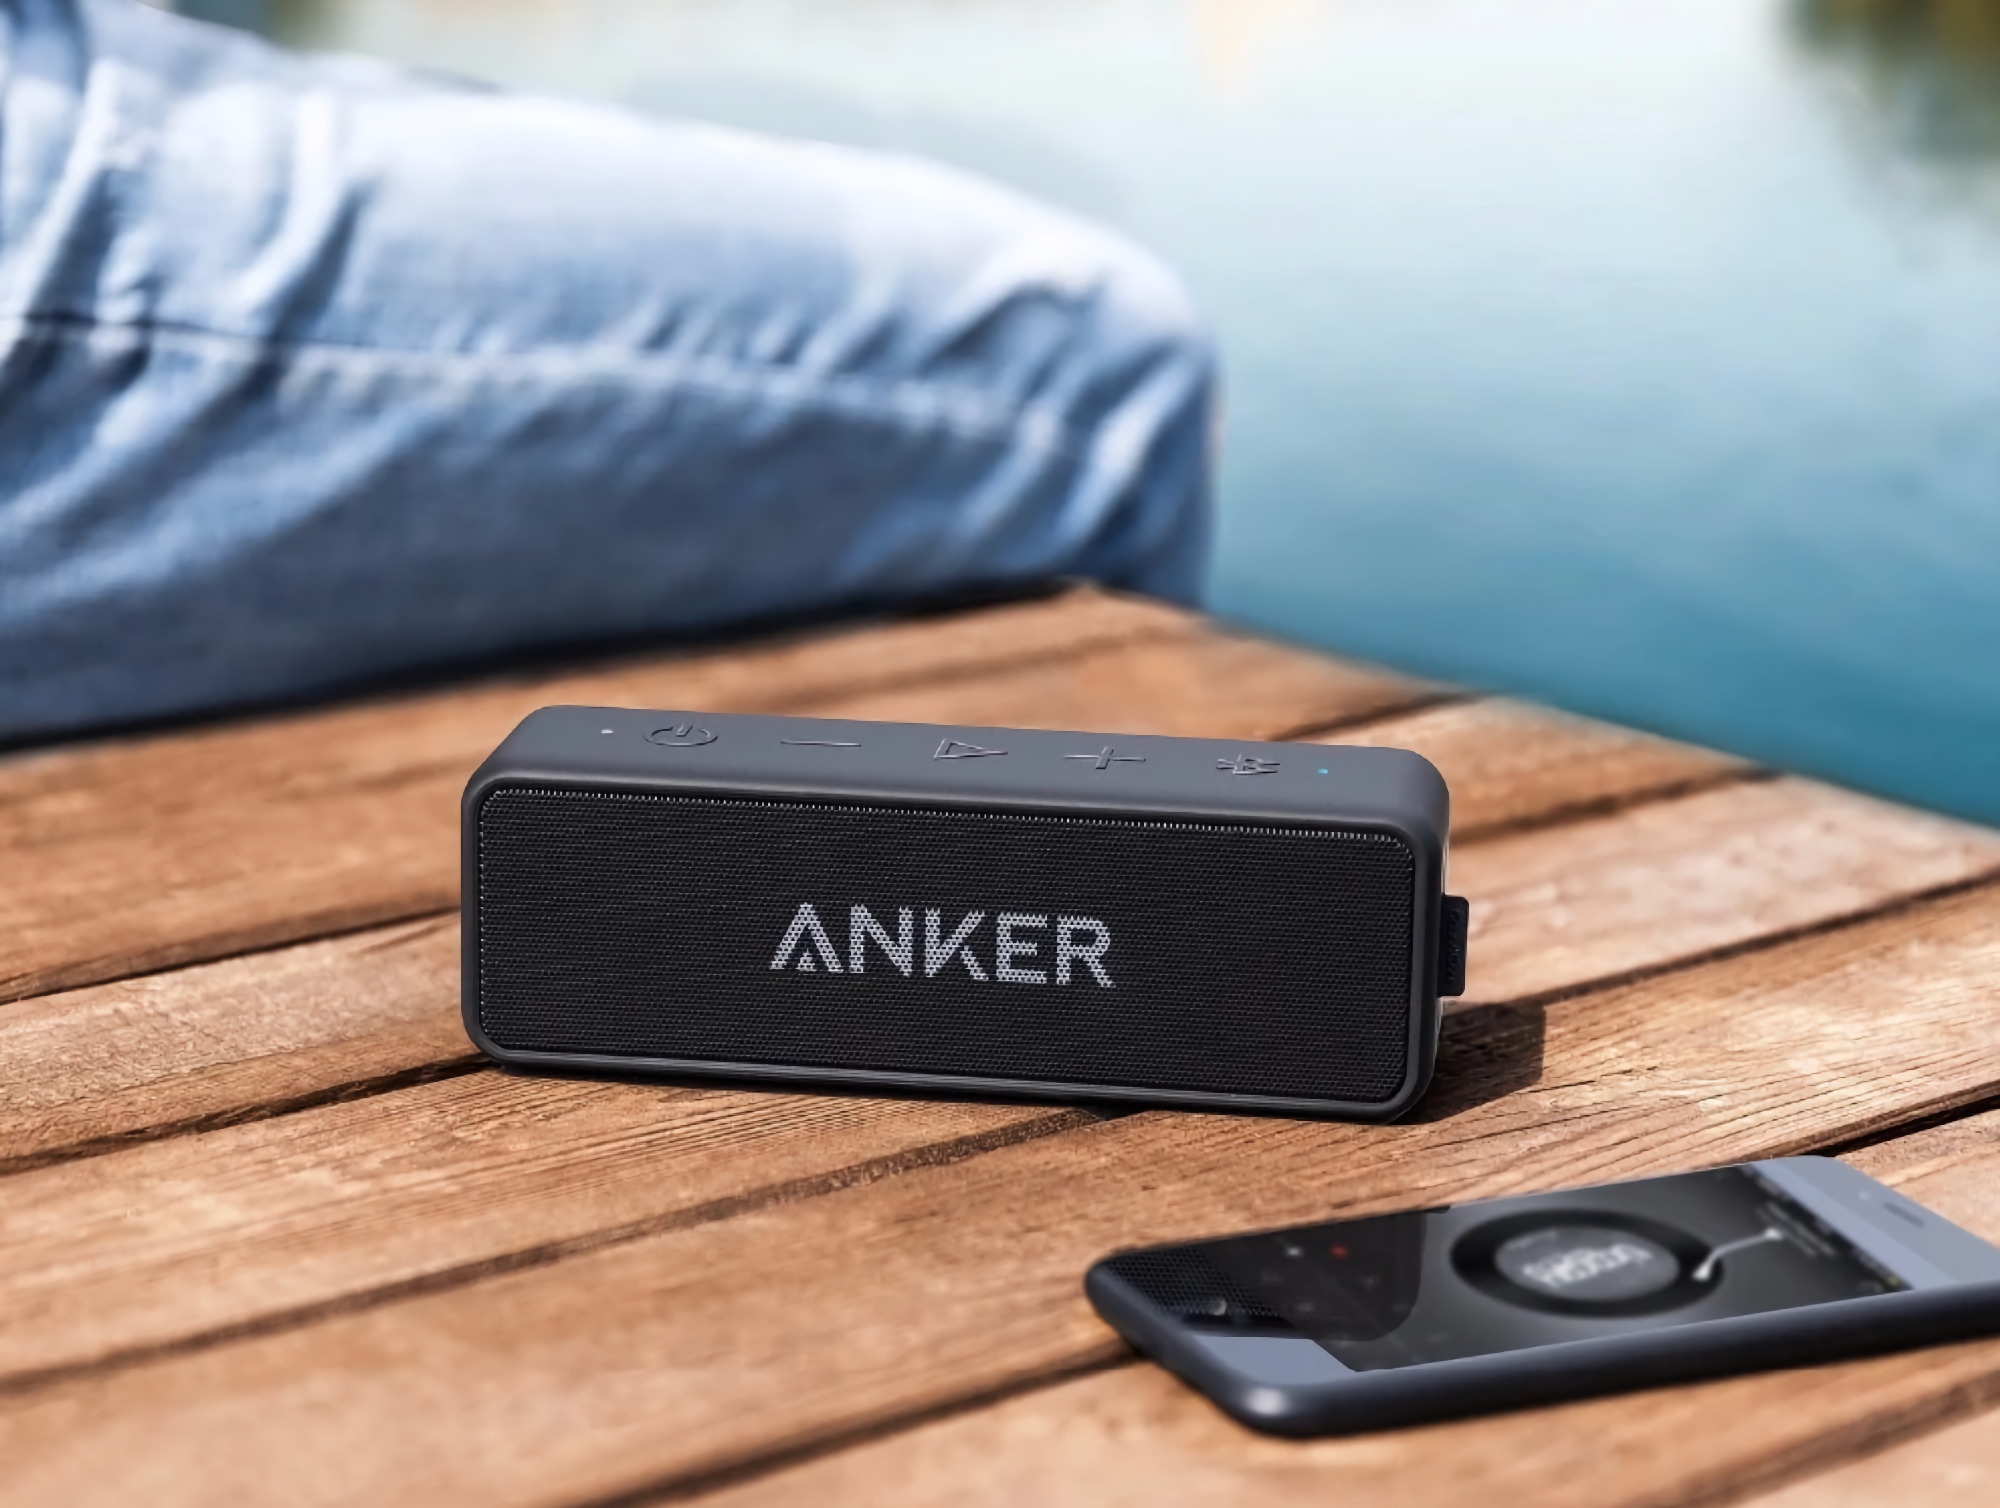 Anker Soundcore 2 wireless 12-watt speaker with water protection and battery life up to 24 hours on sale on AliExpress for $35